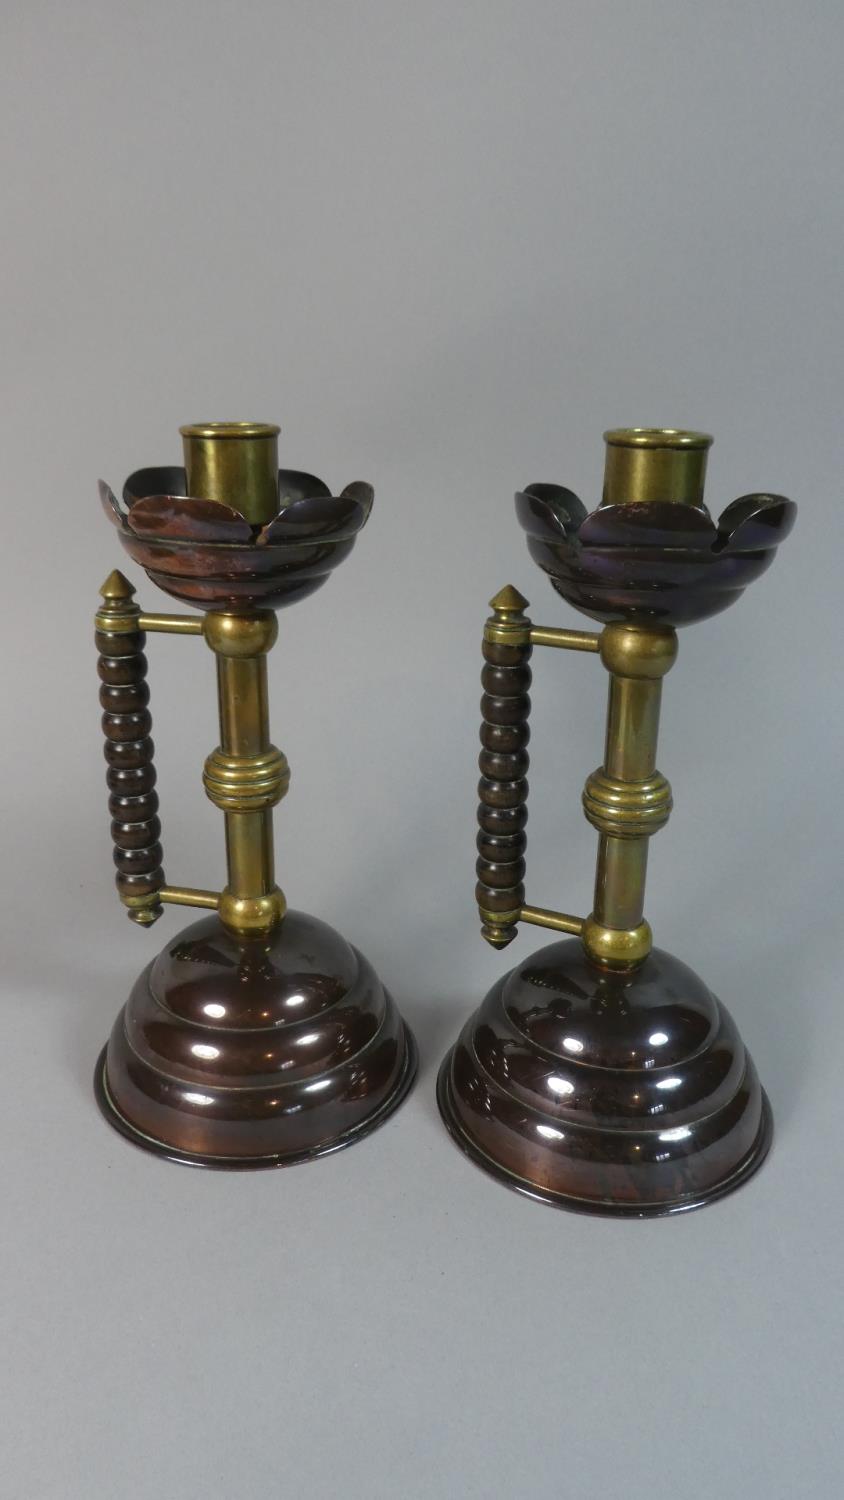 A Pair of Arts and Crafts Candlesticks After Christopher Dresser by Benham and Froud, Reg. 53791